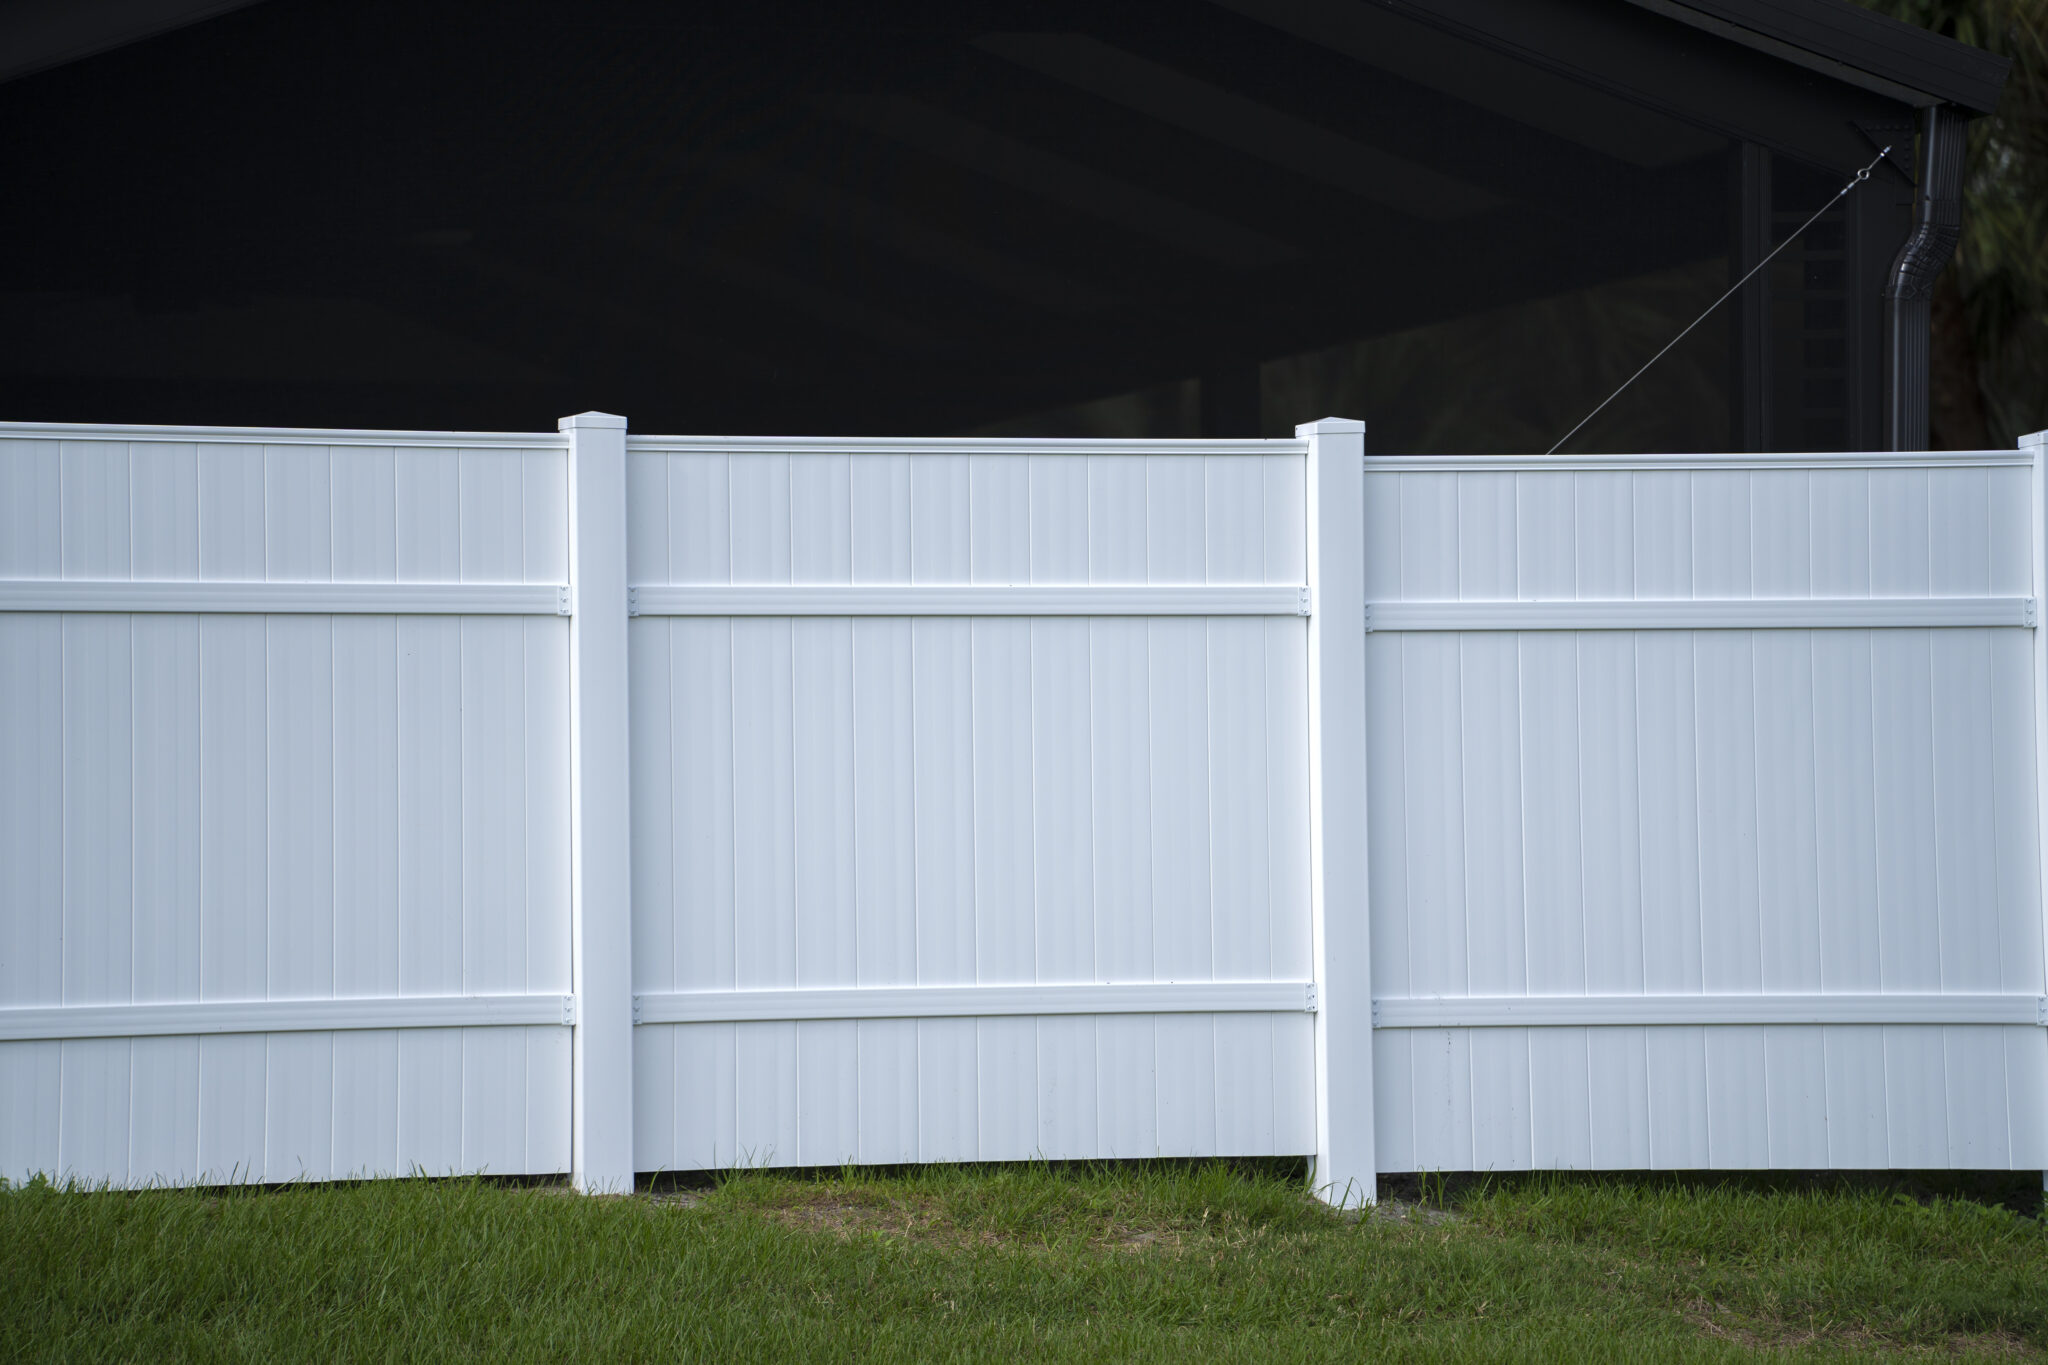 White vinyl picket fence on green lawn surrounding property grounds for backyard protection and privacy.